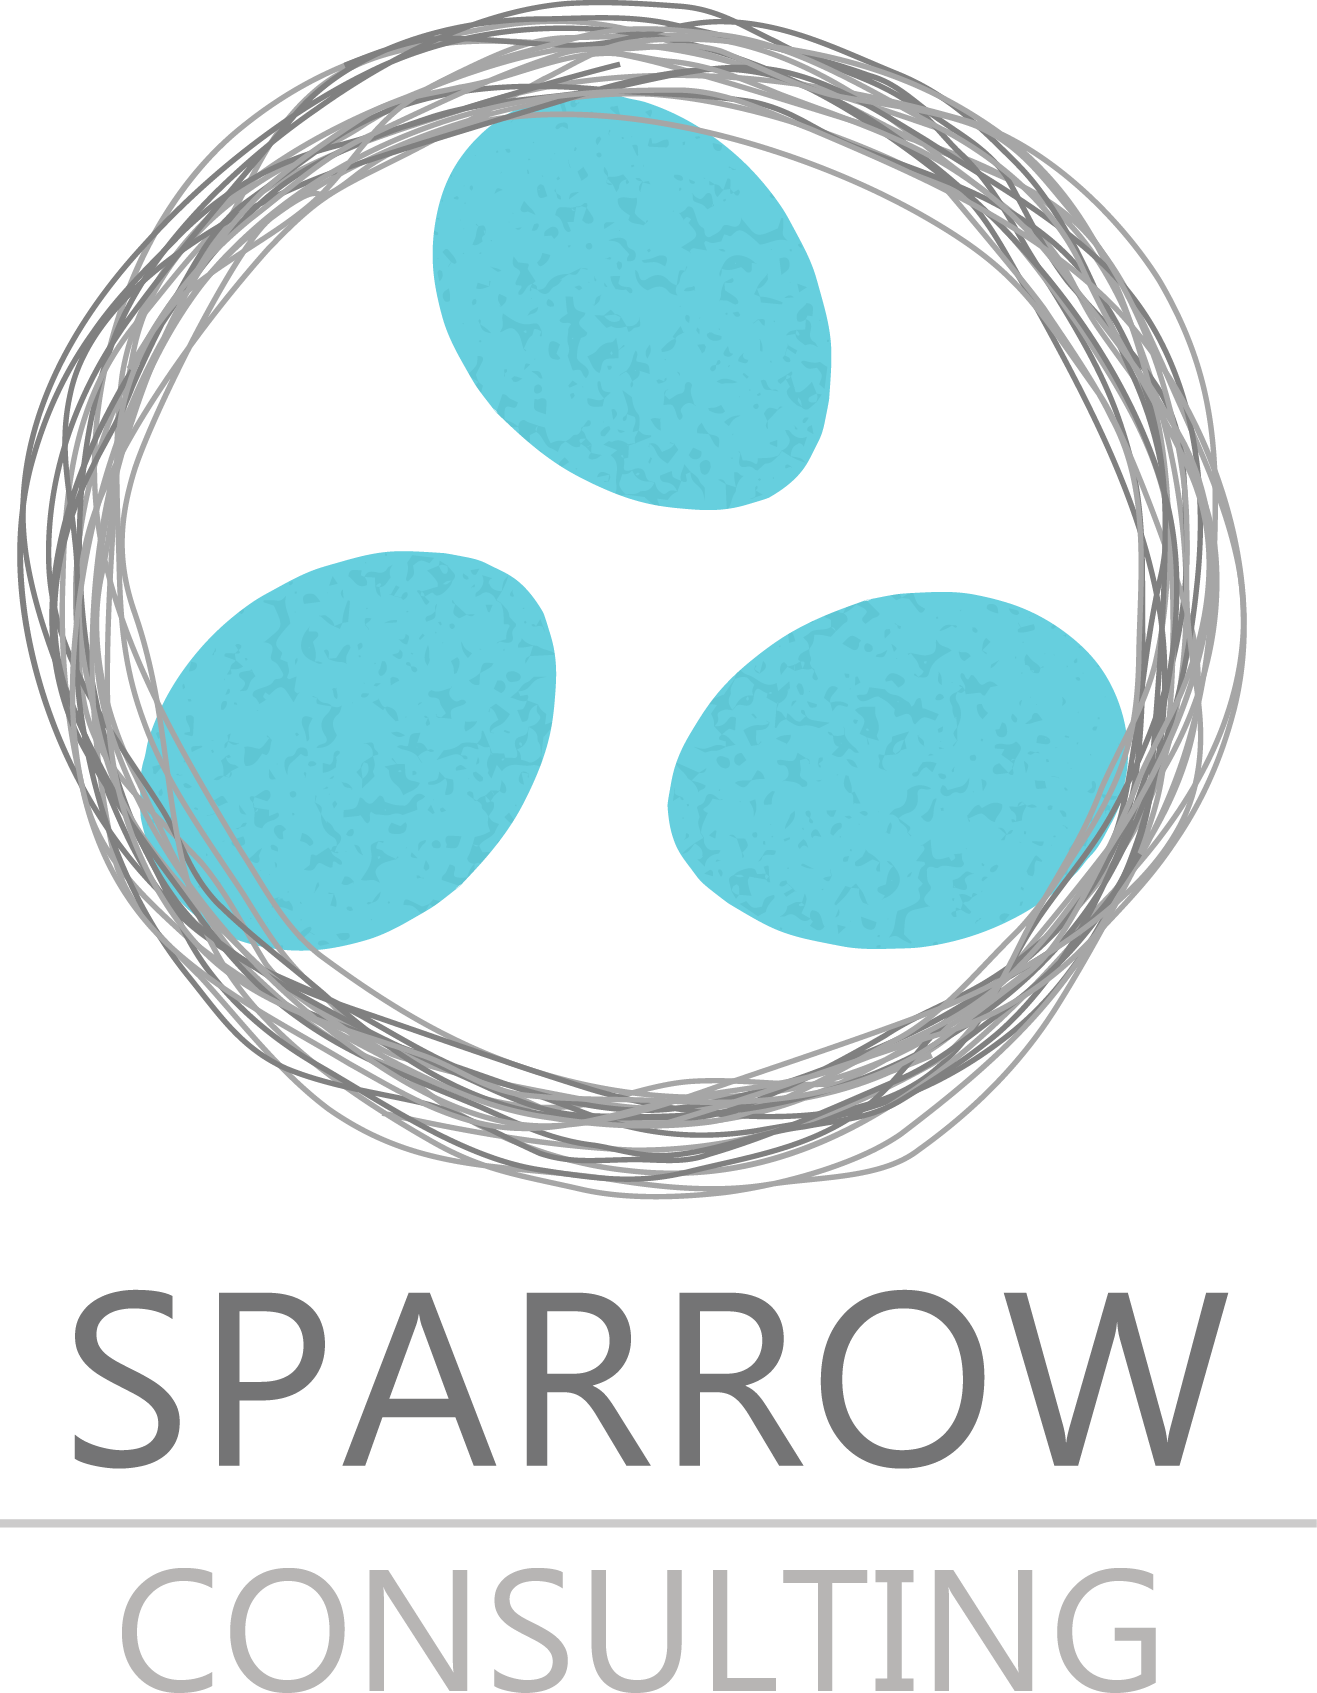 Sparrow Consulting, LLC